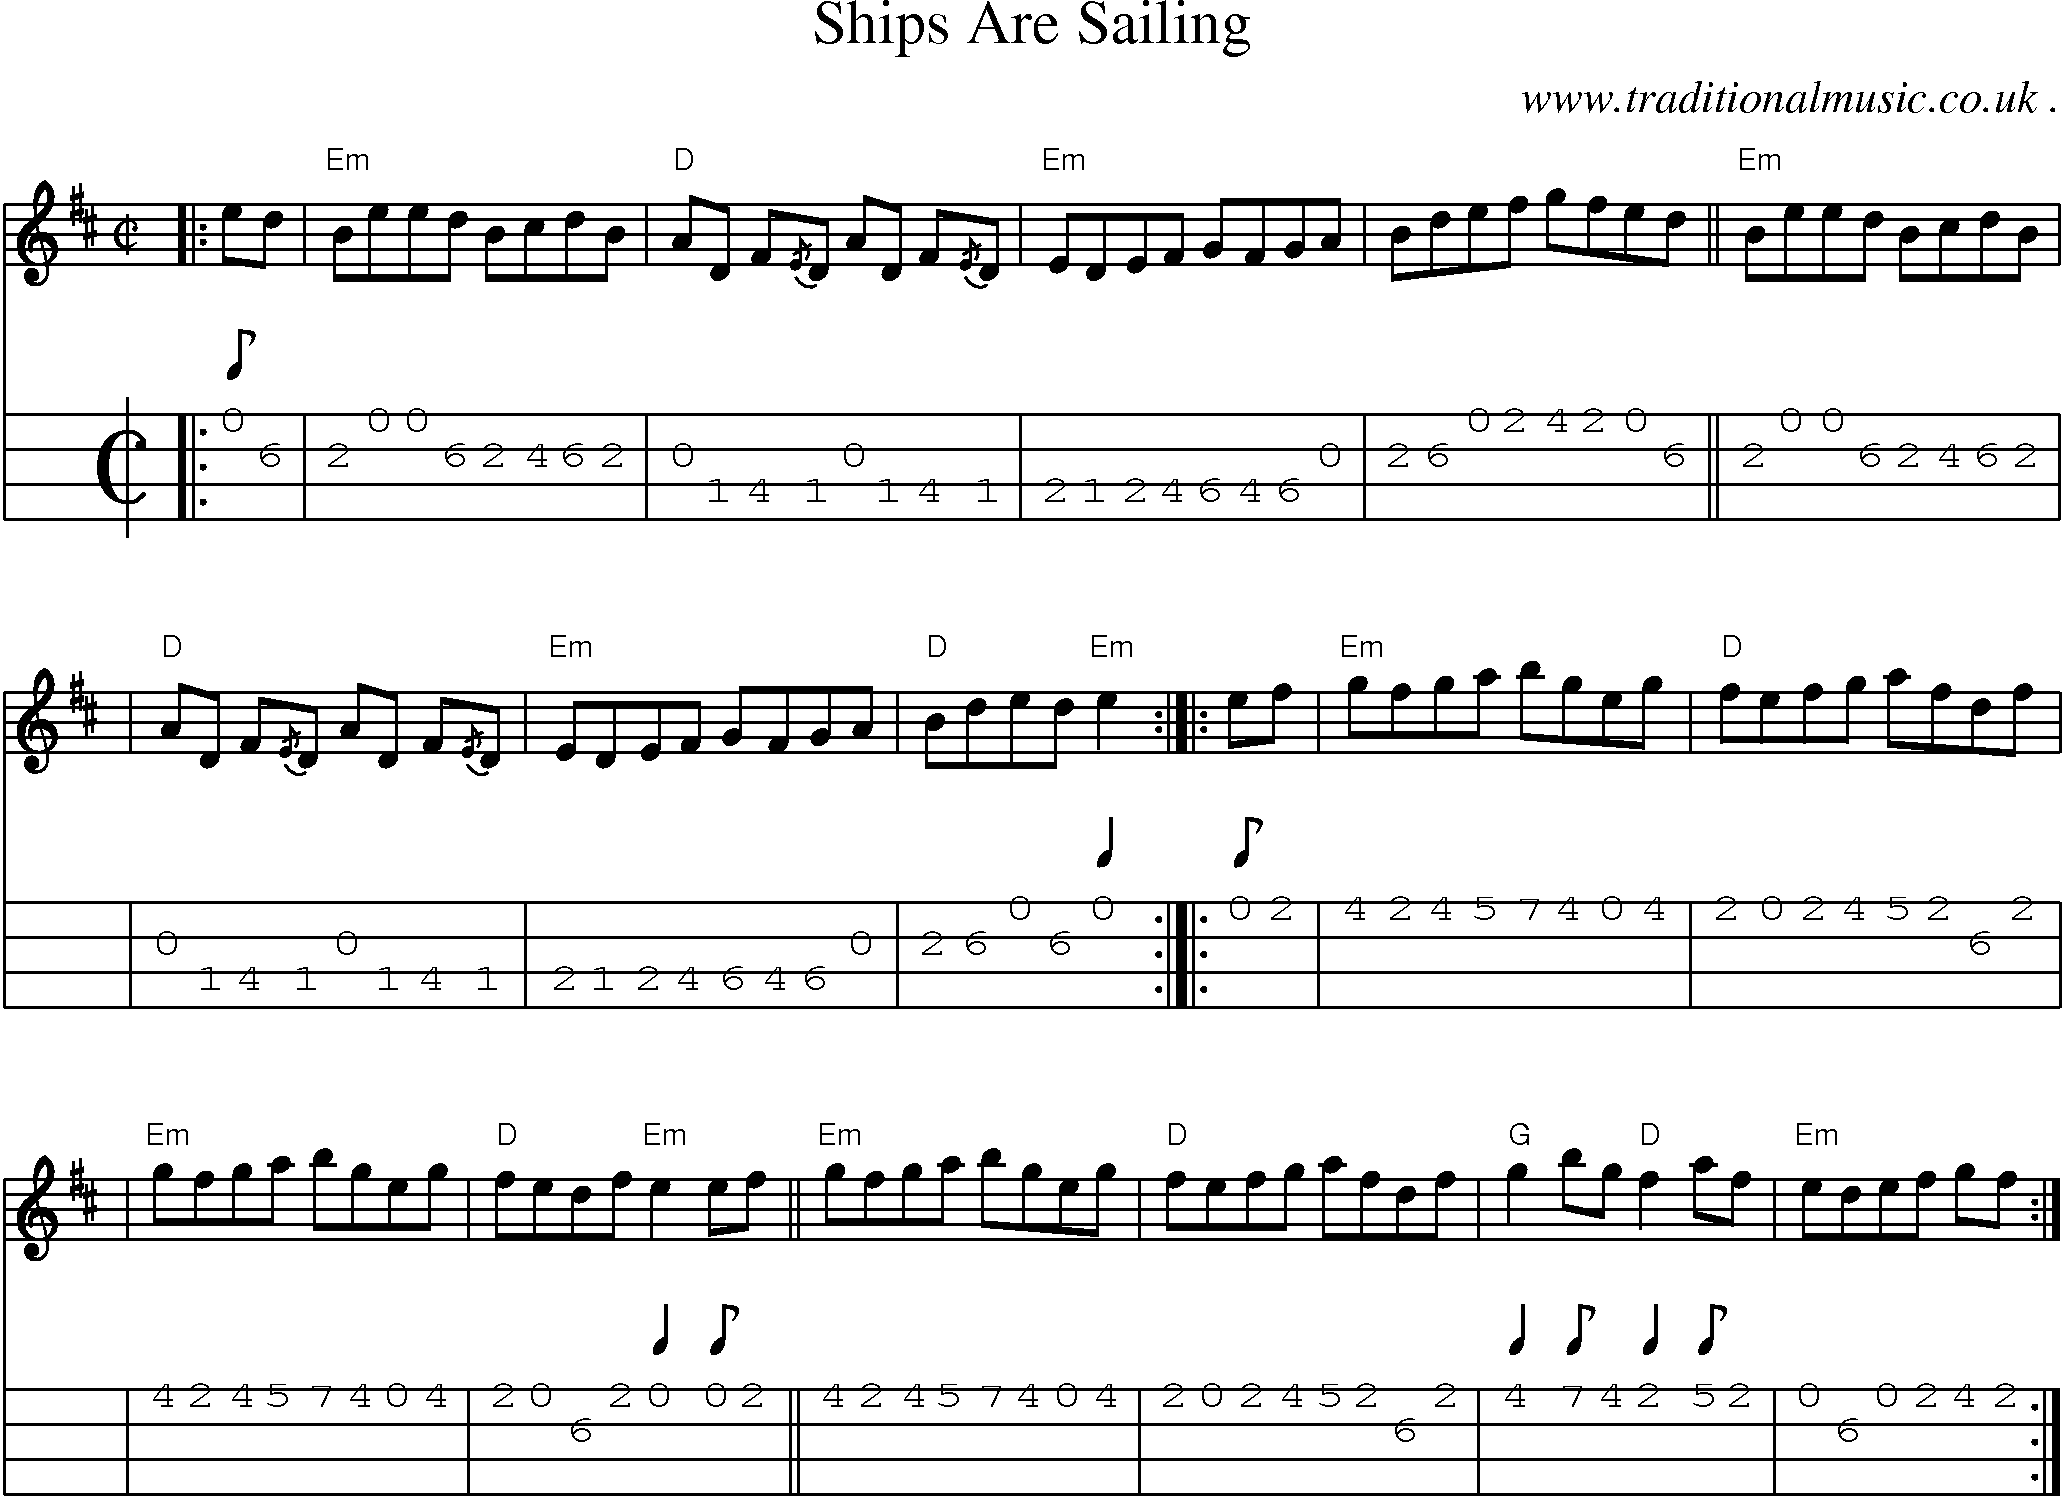 Sheet-music  score, Chords and Mandolin Tabs for Ships Are Sailing